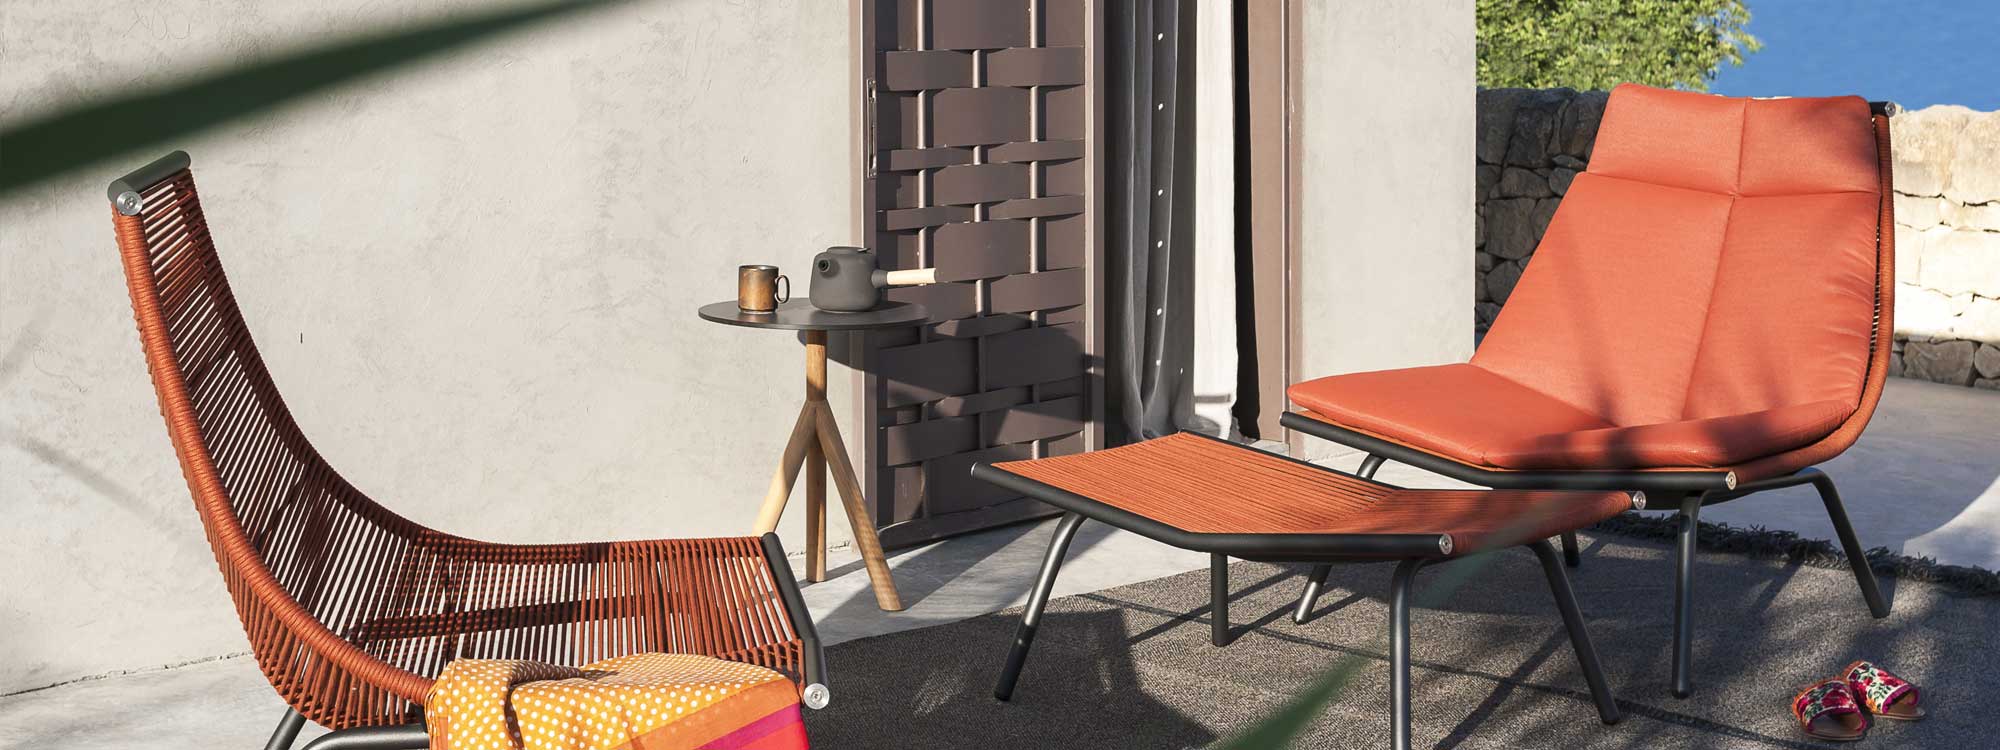 Image of pair of RODA Laze minimalist outdoor lounge chairs with smoke-colored frame and orange cord seat and back, together with Laze foot rest in the same finish